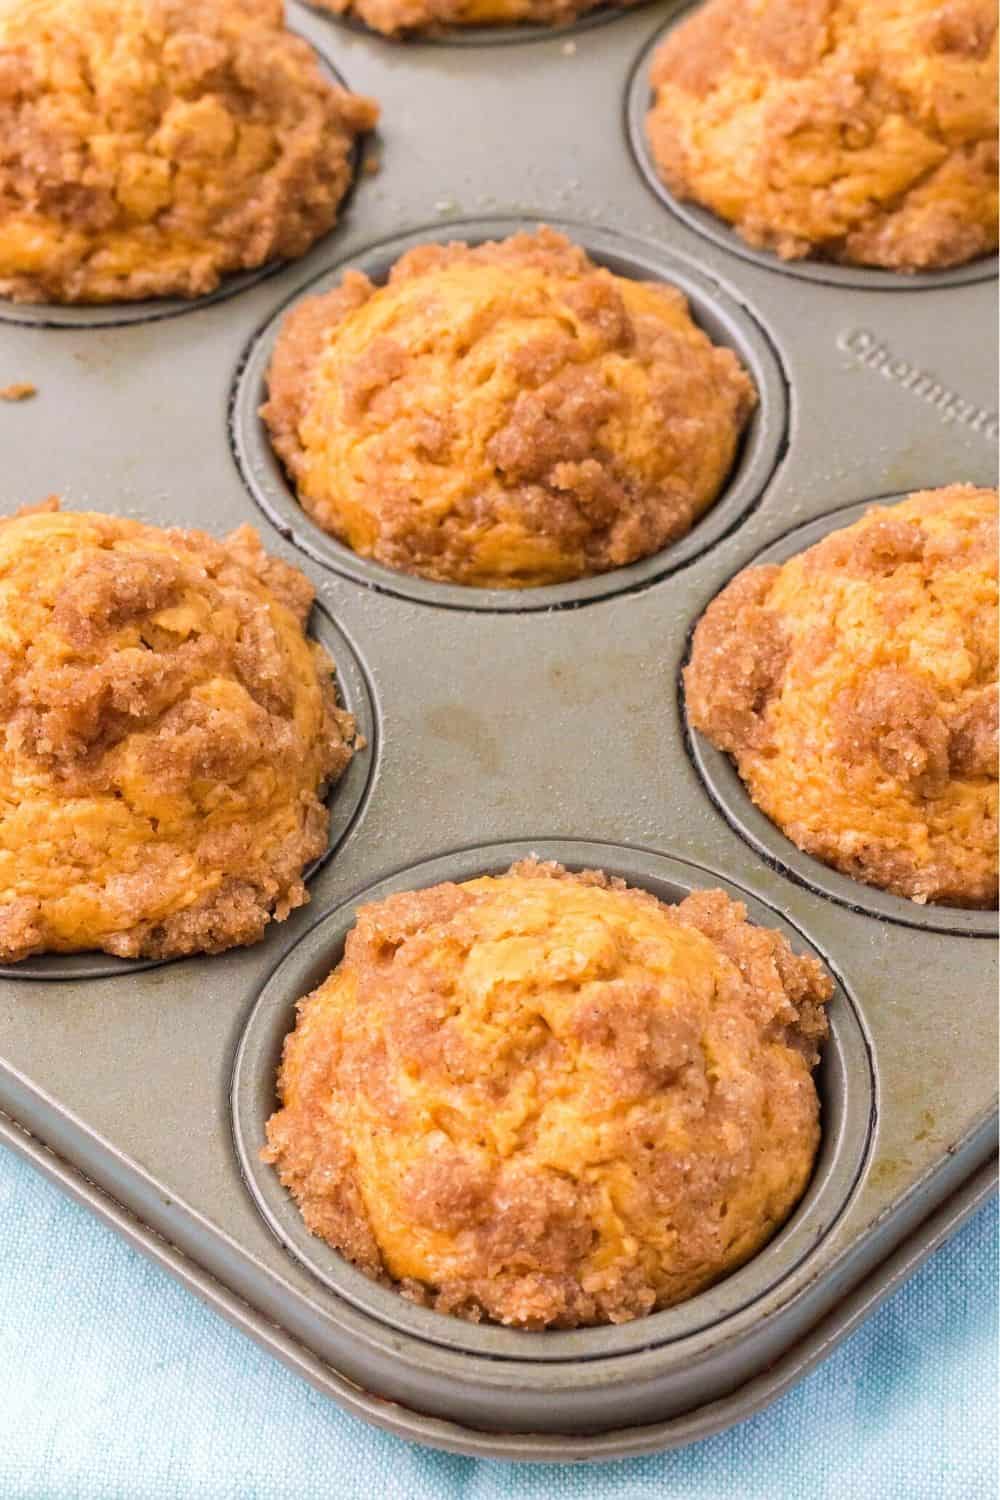 close-up view of freshly baked sweet potato Bisquick muffins, still in the muffin pan.